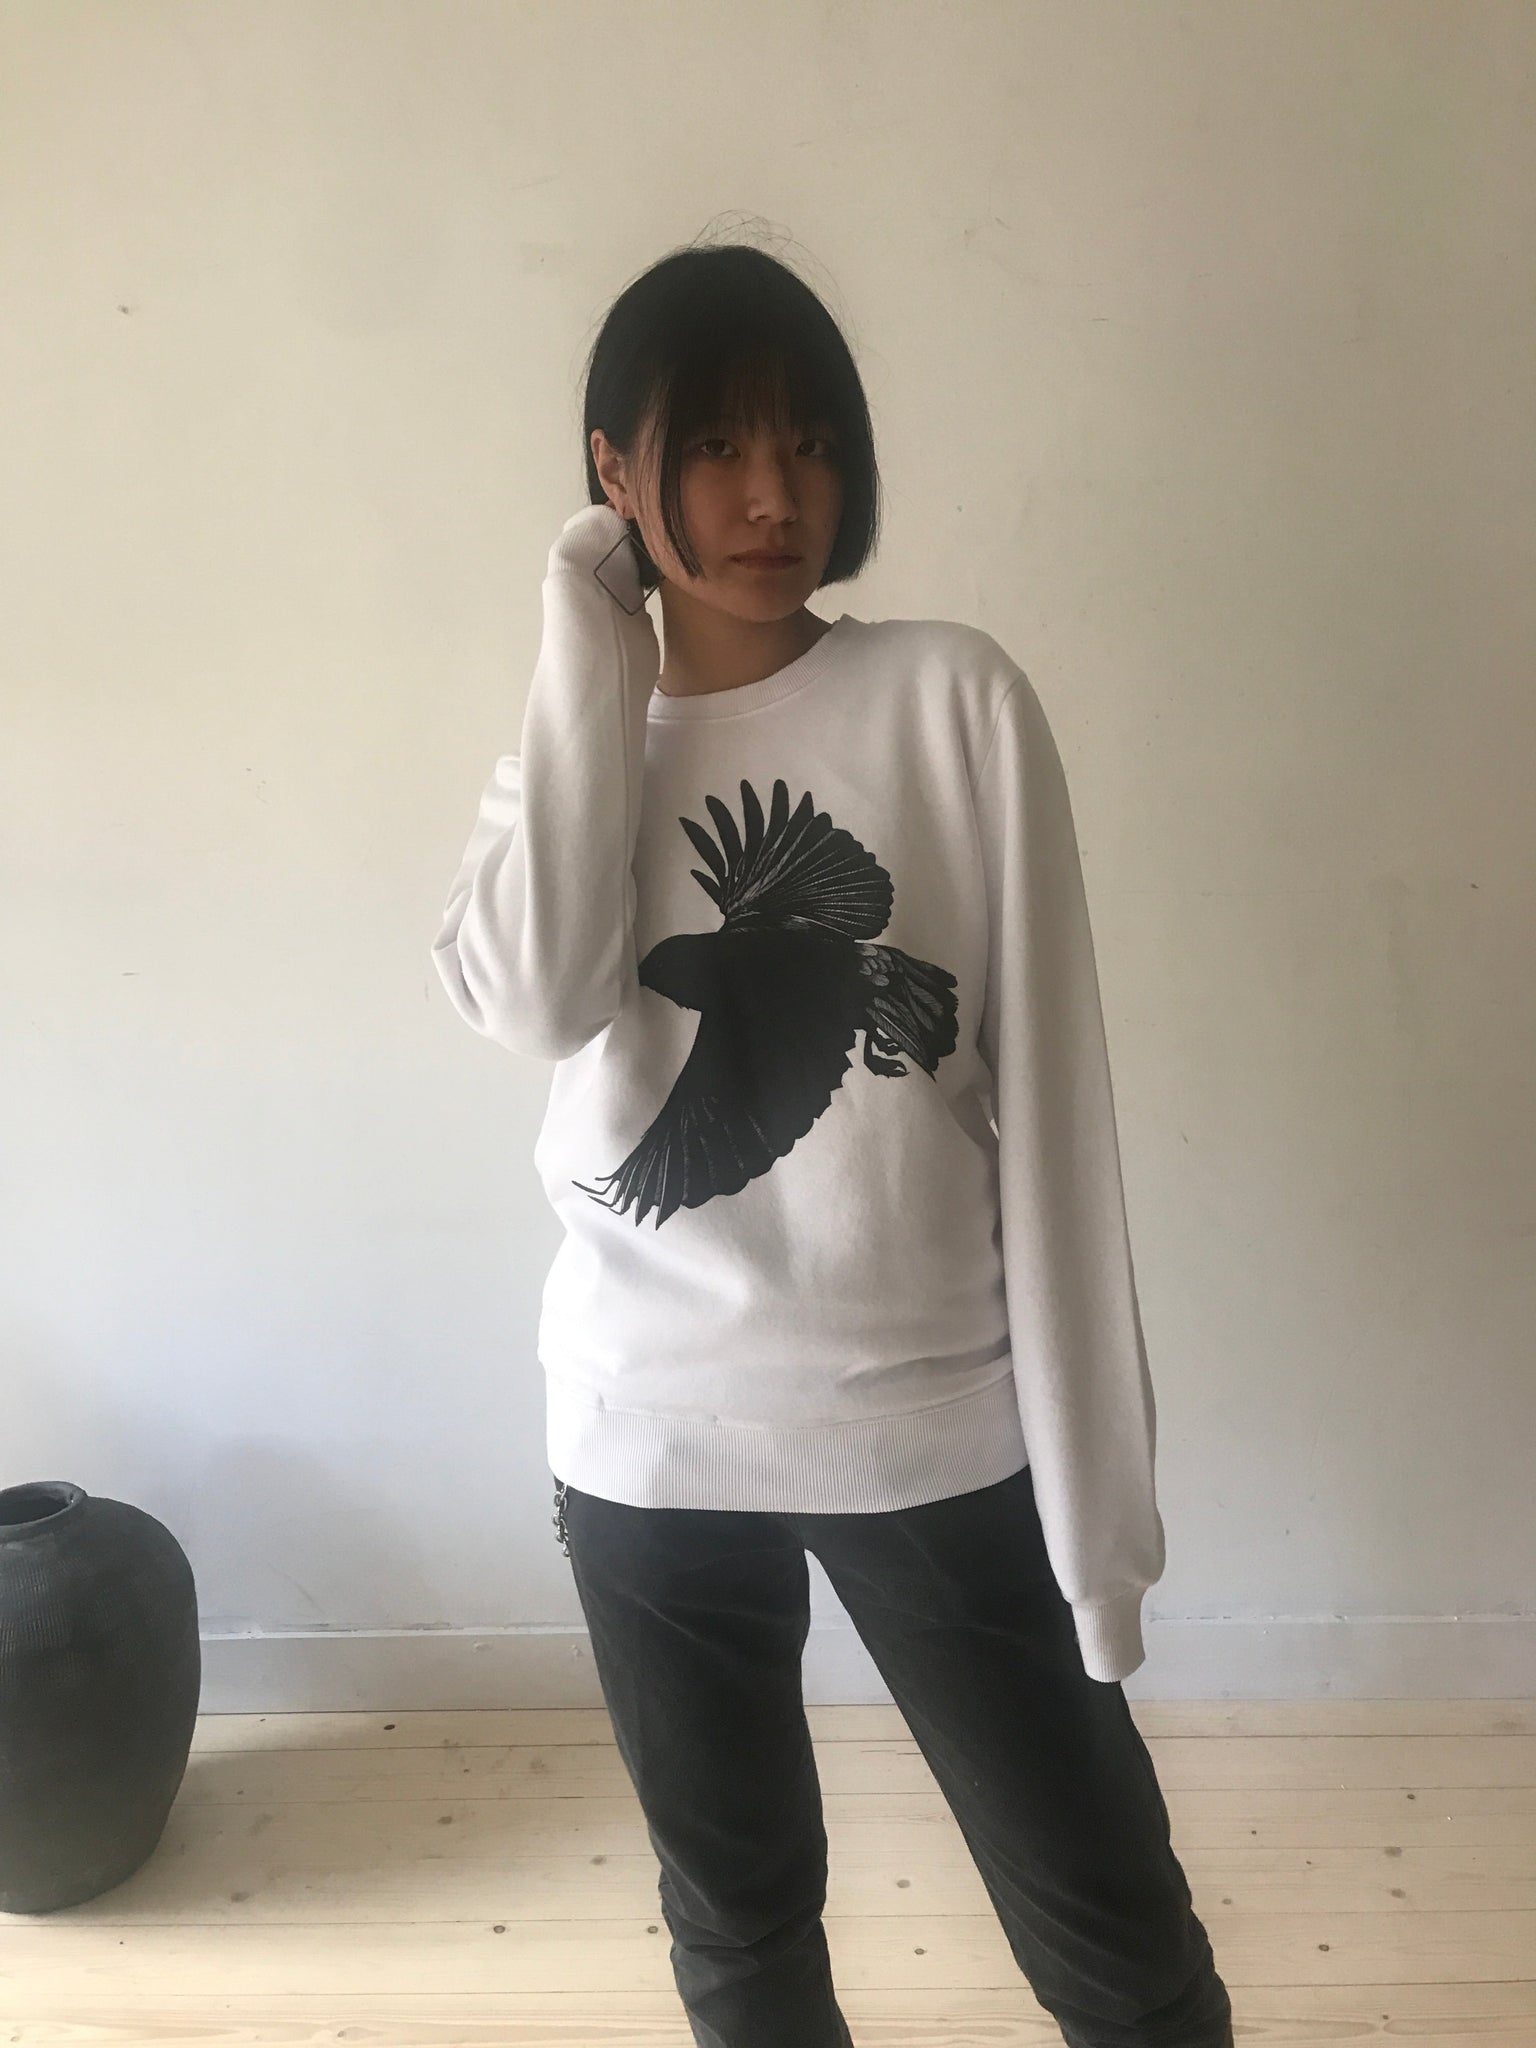 Window Dressing The Soul Crow White Sweater